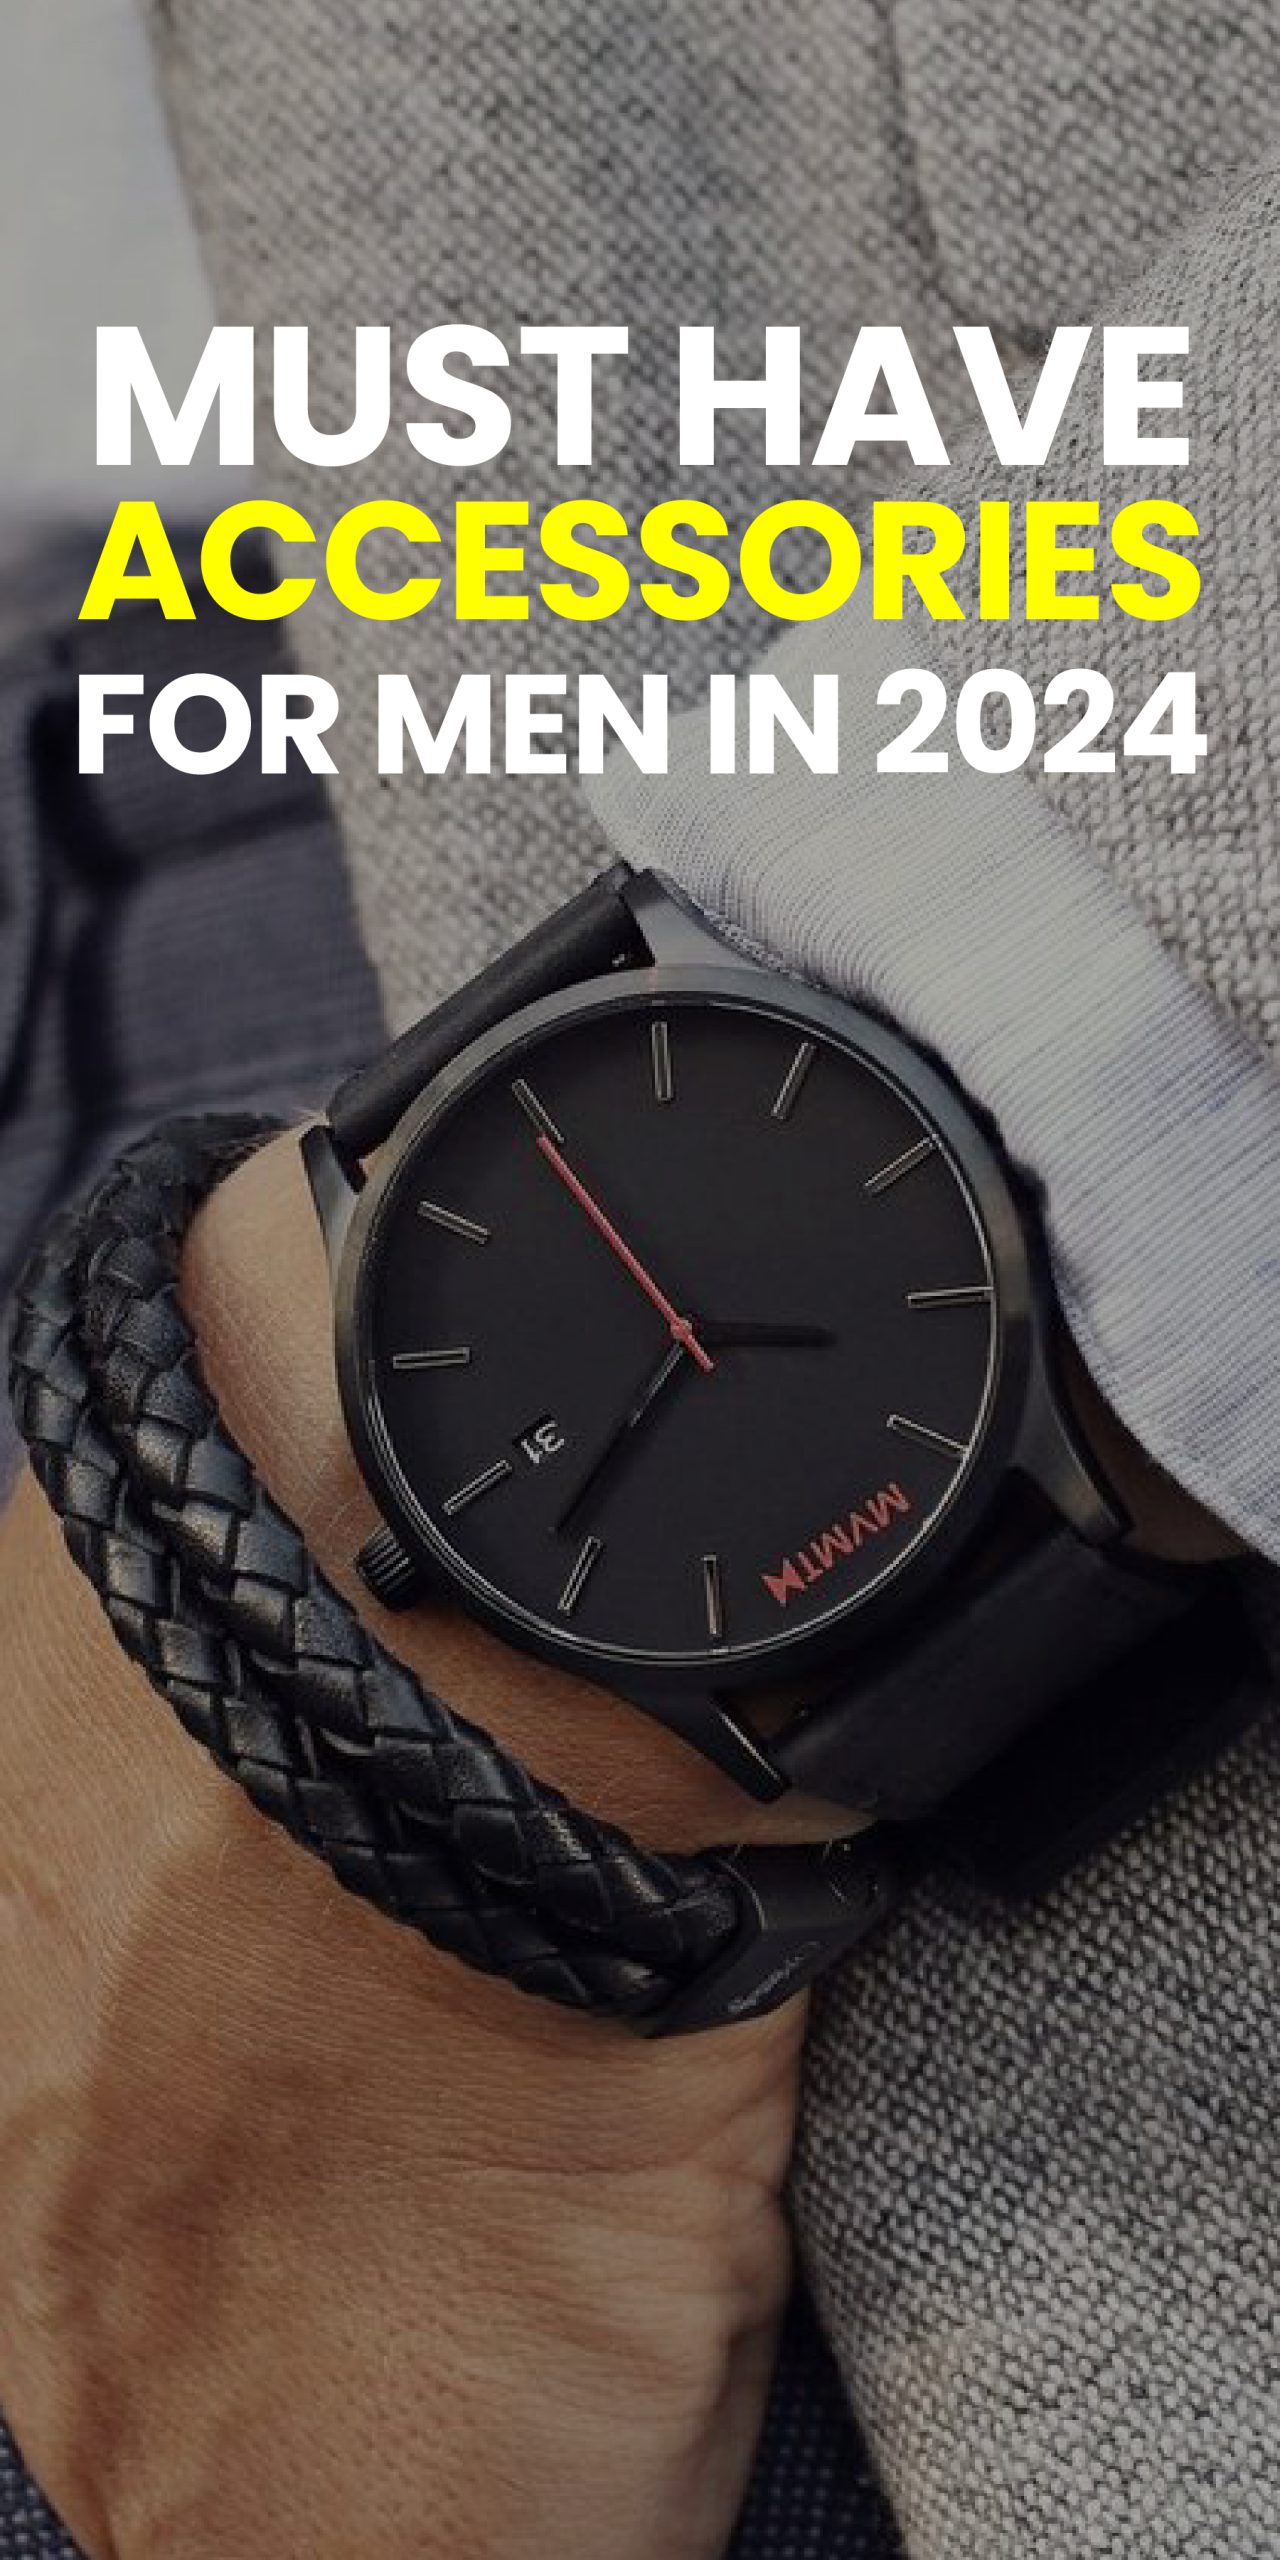 MUST HAVE ACCESSORIES FOR MEN IN 2024